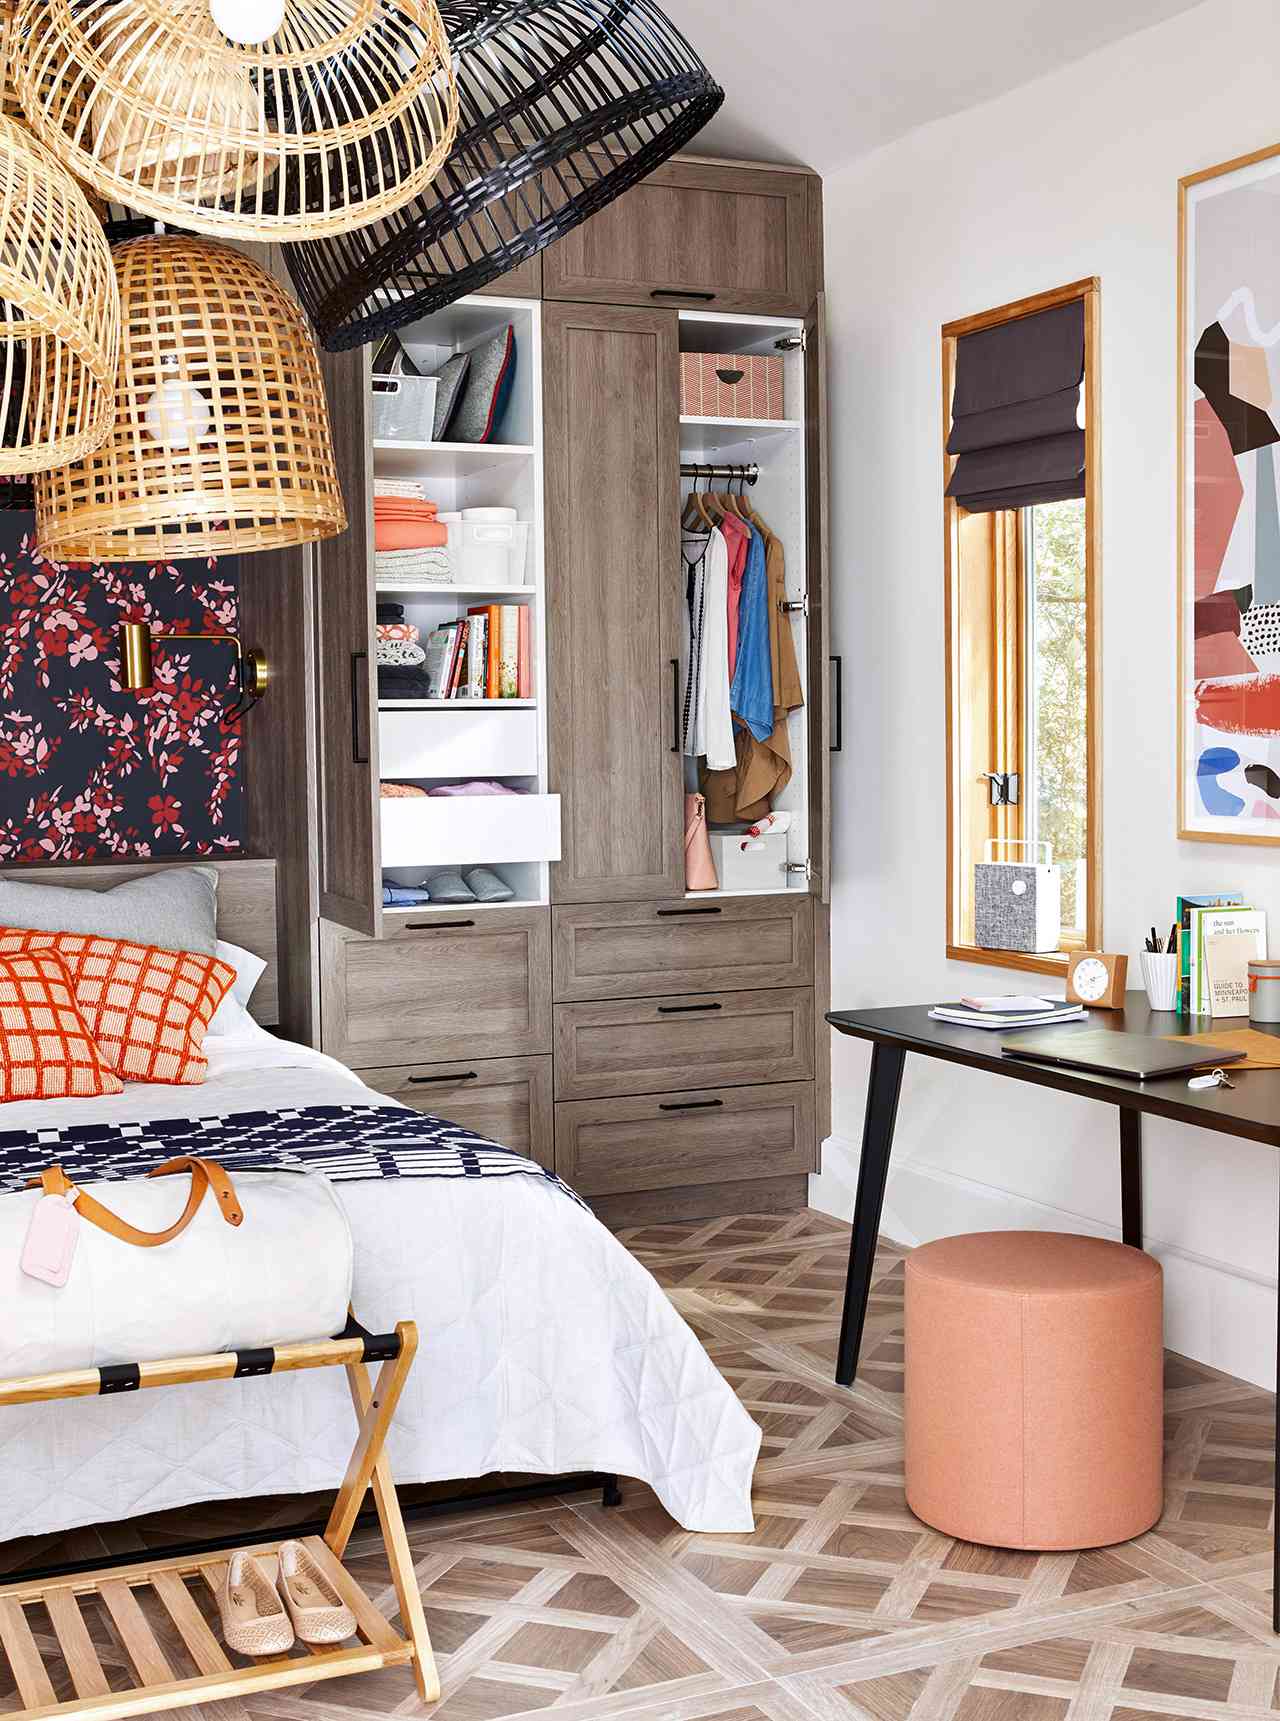 26 Bedroom Storage Solutions for a More Organized Sleeping Space